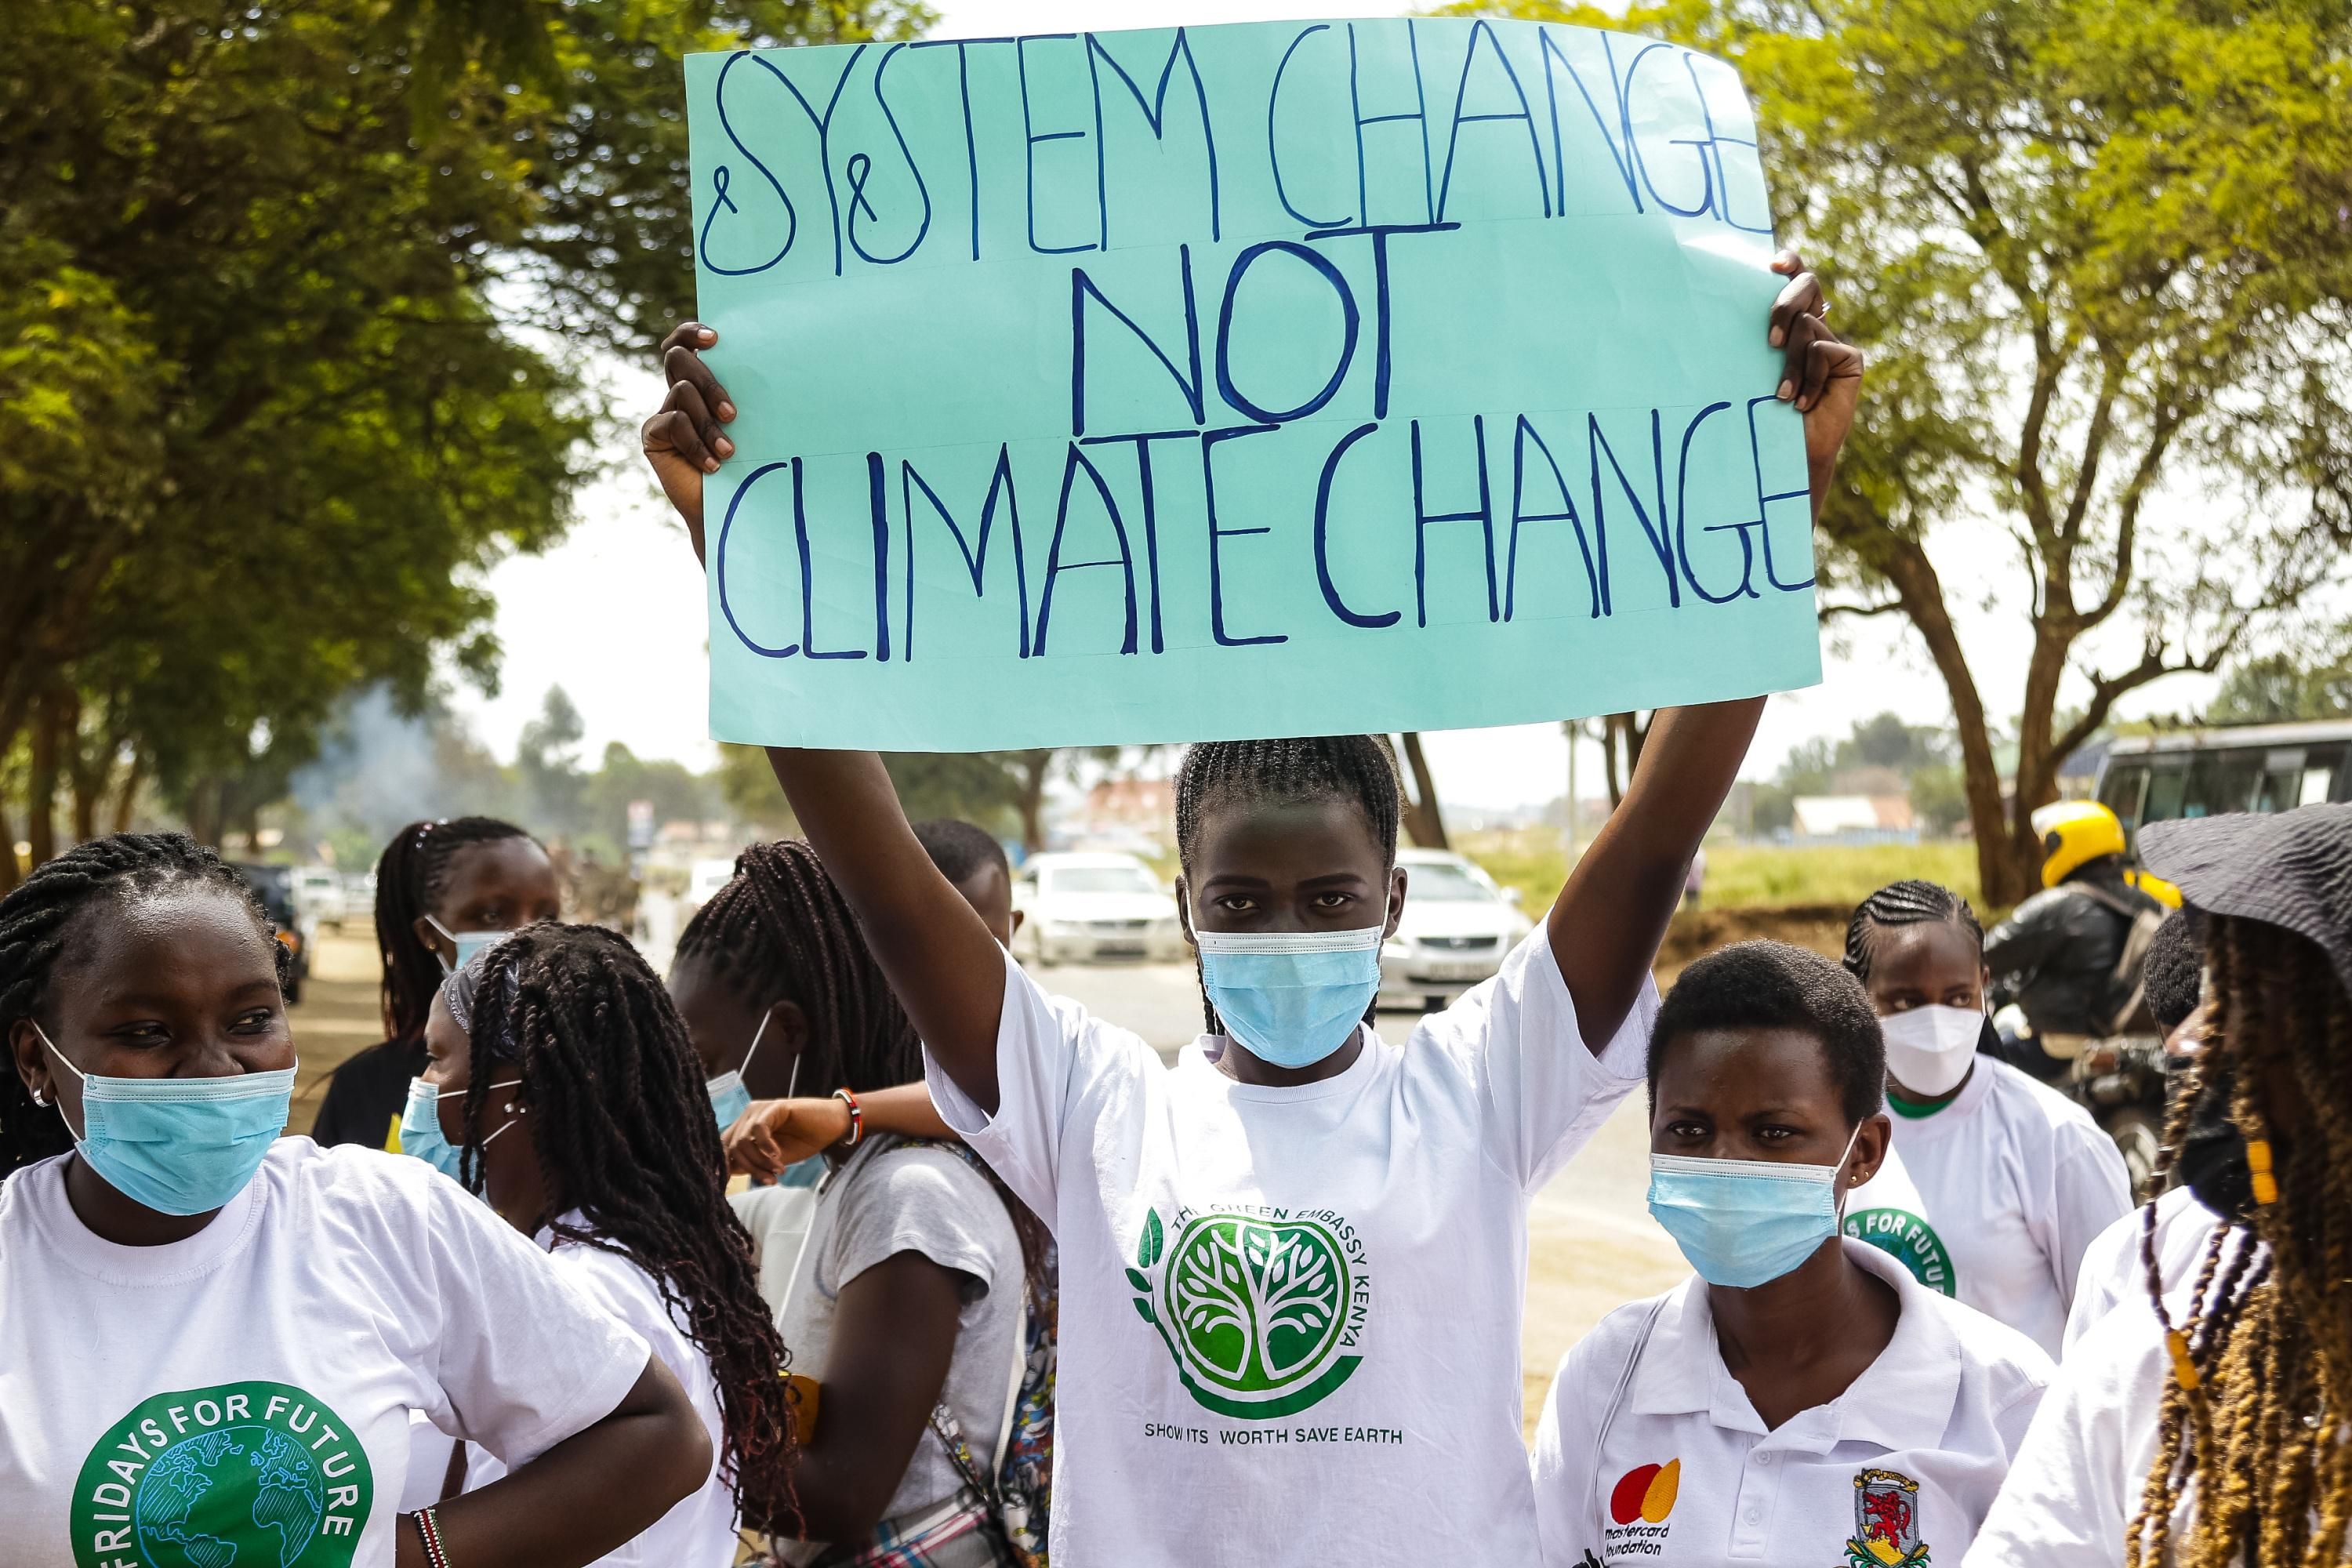 Activist holding sign reading, "System change not climate change"